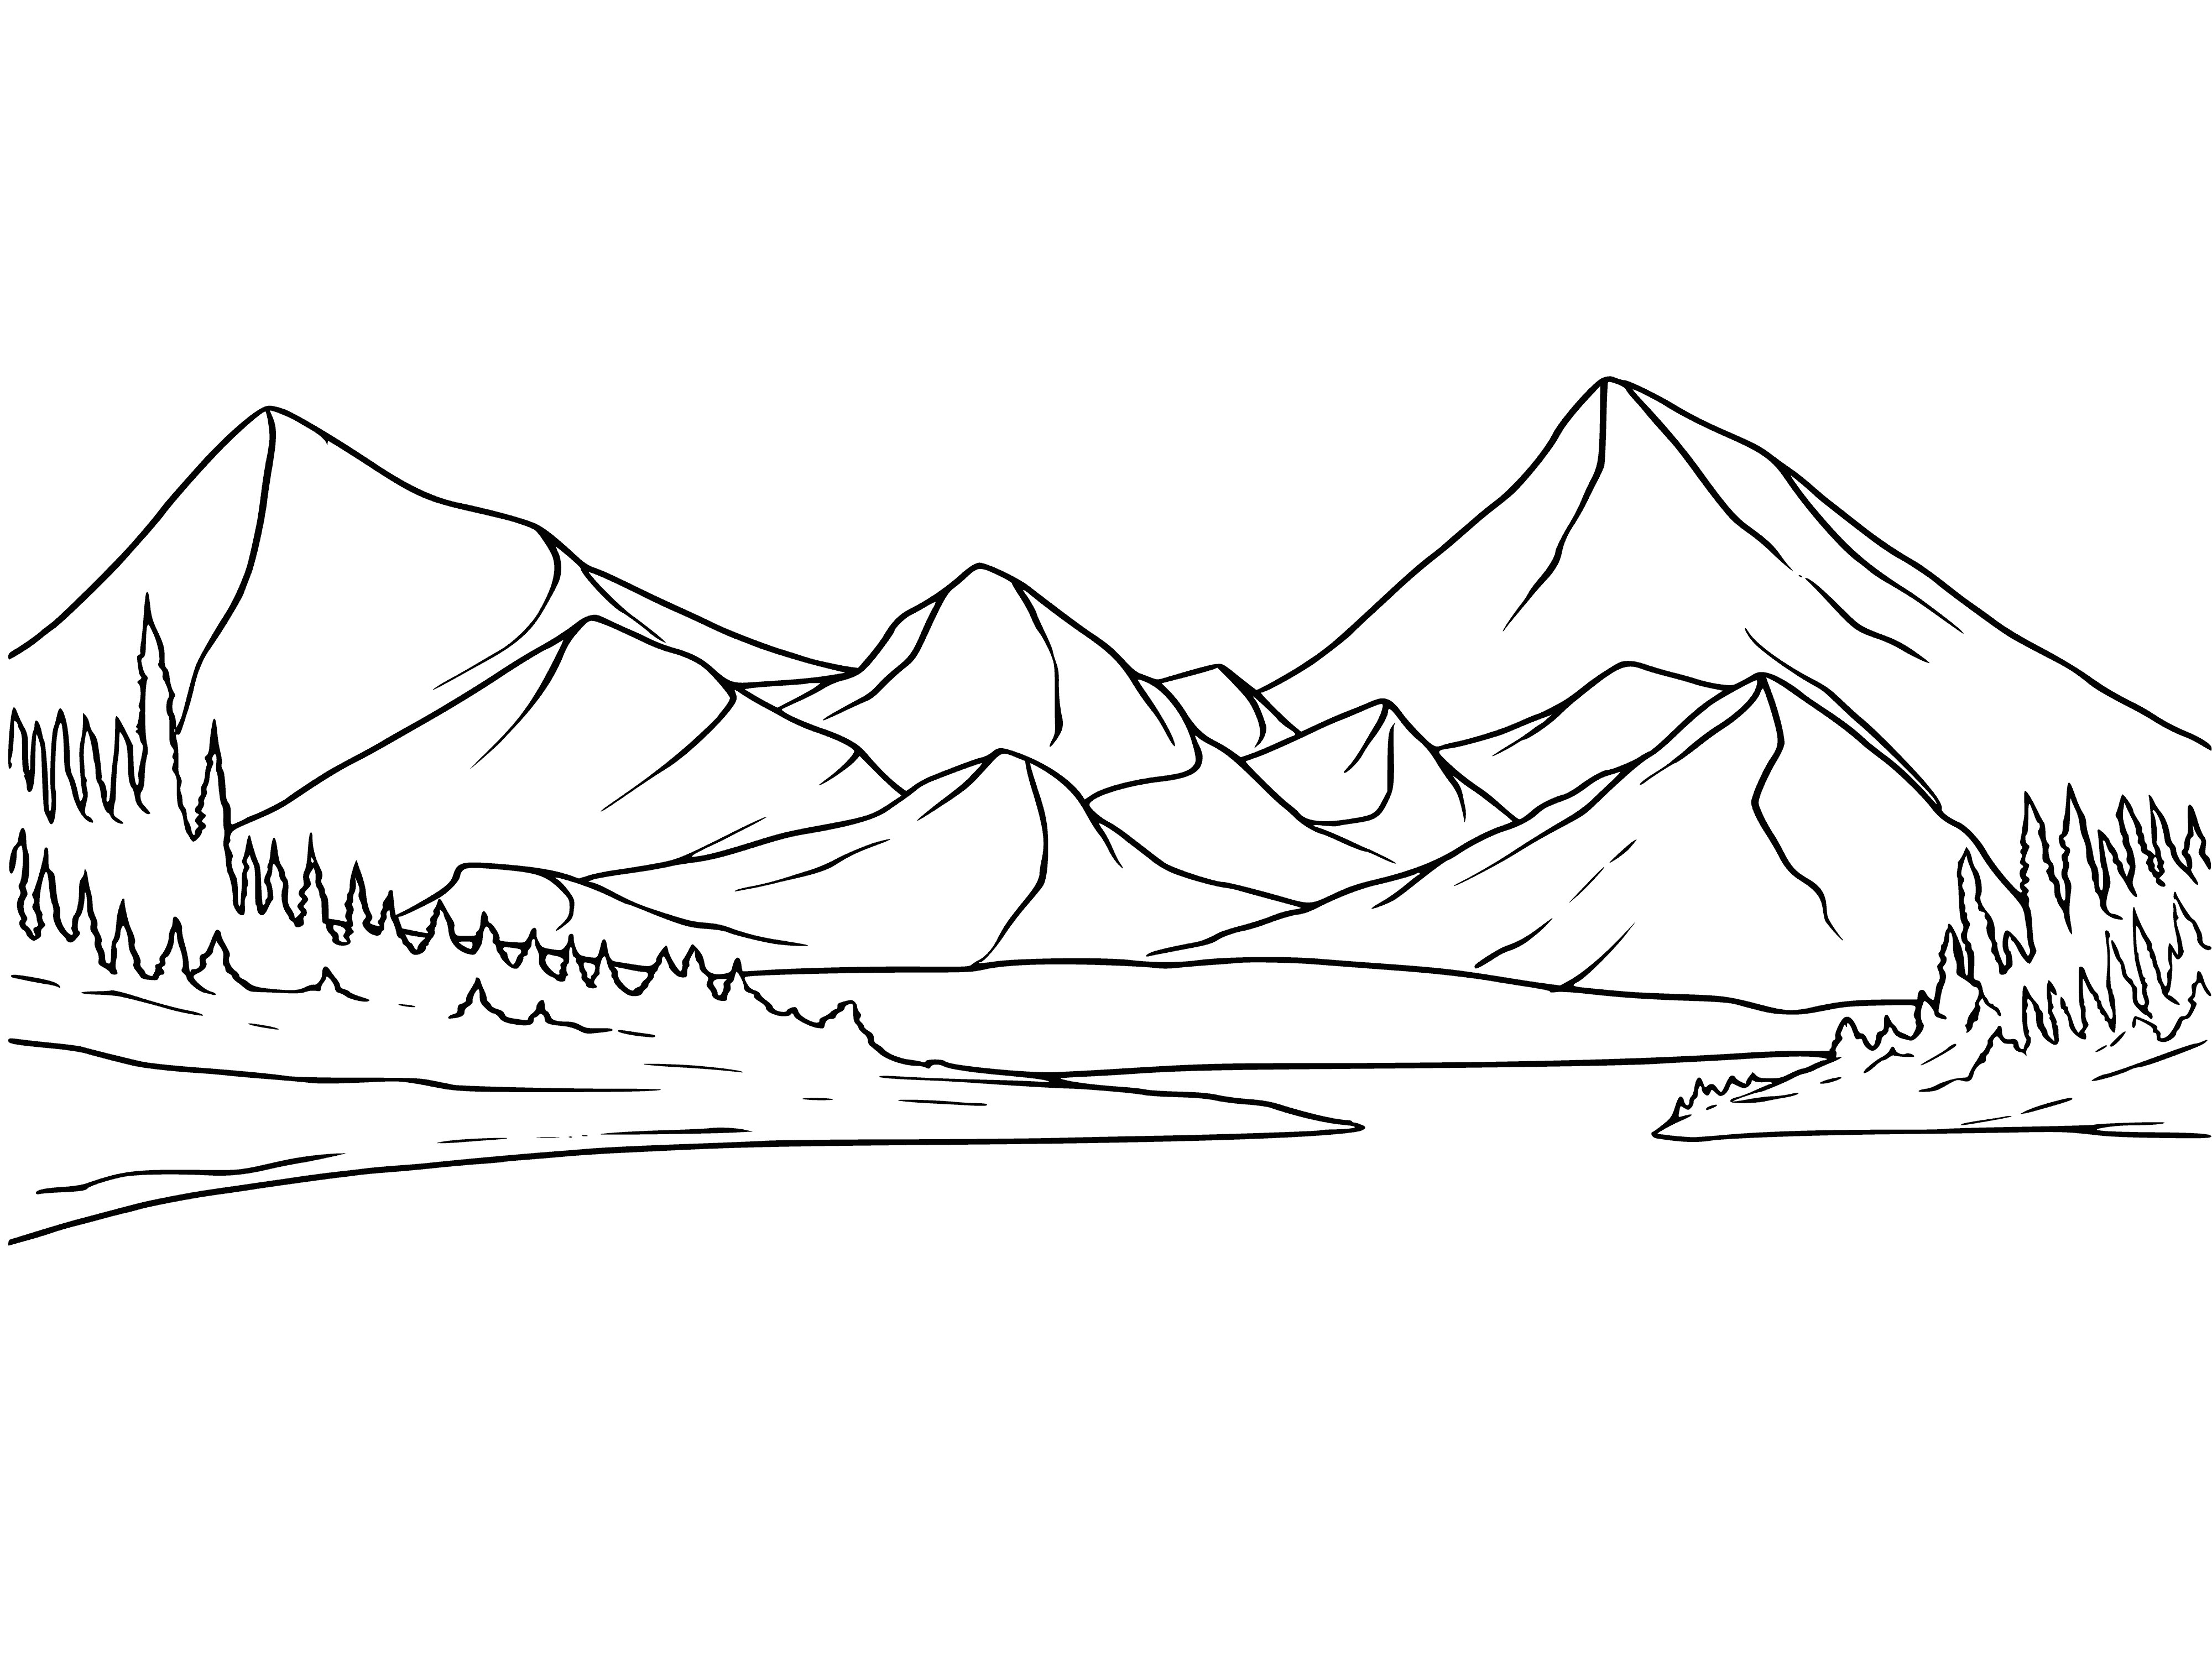 coloring page: A landscape of green mountains topped with snow, surrounded by trees and water. A serene blue sky in the background.